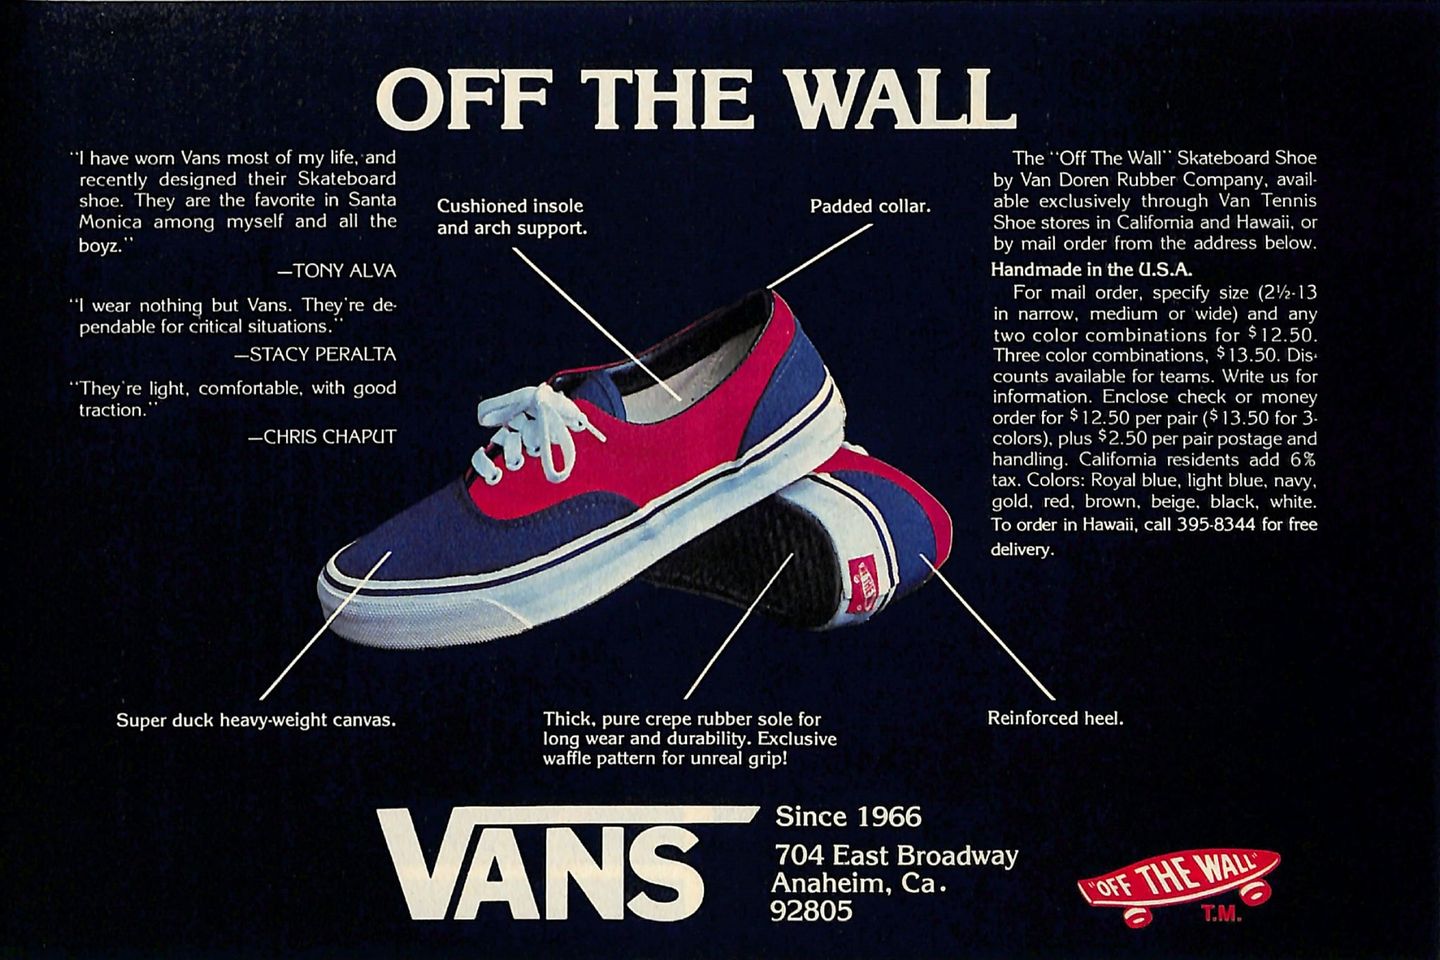 Off The Wall Padded collar. Cushioned insole and arch support. I have worn Vans most of my life, and recently designed their Skateboard shoe. They are the favorite in Santa Monica among myself and all the boyz." Tony Alva "I wear nothing but Vans. They're